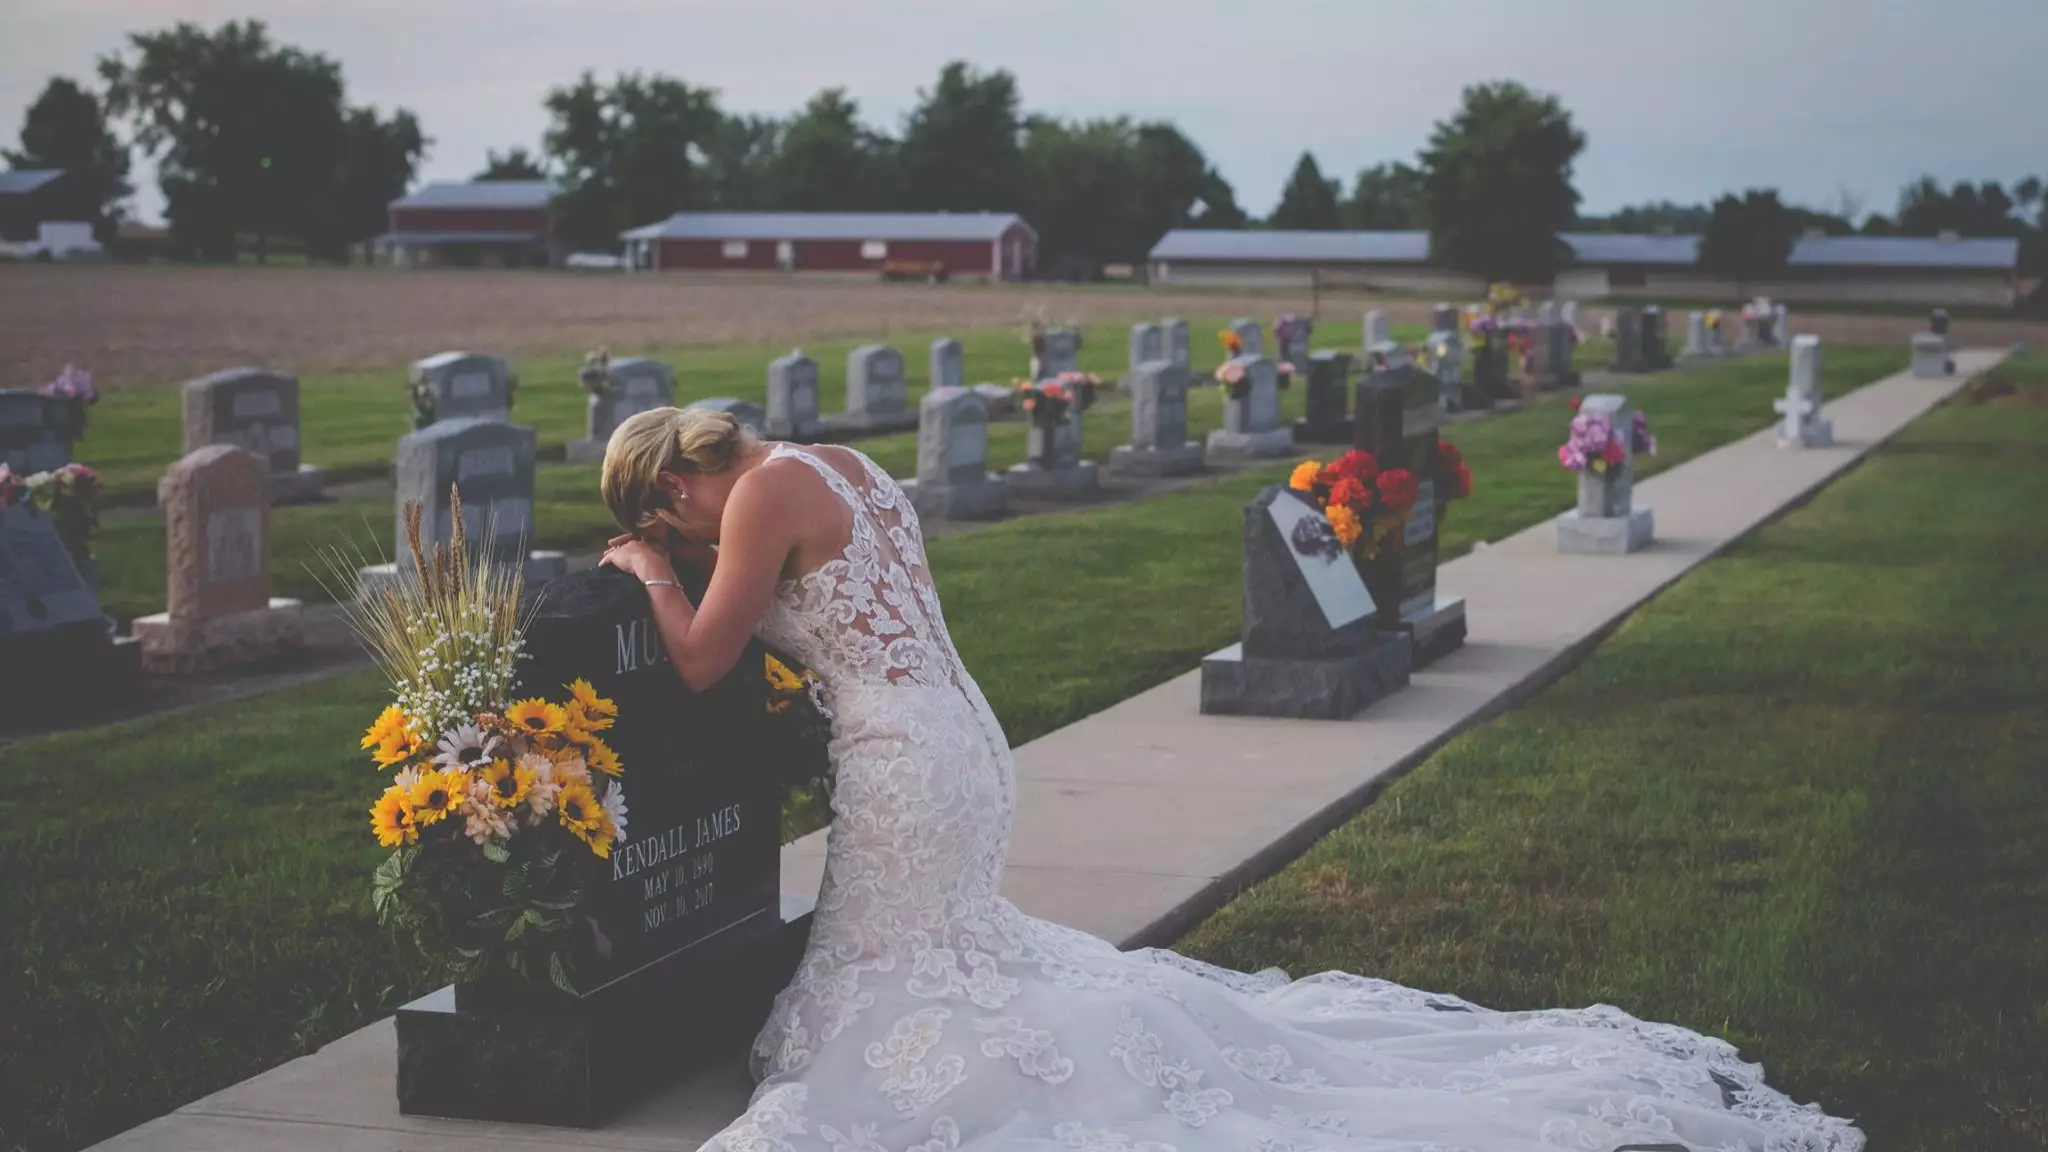 Grieving Bride Visits Late Partner's Grave On Day They Were Set To Marry